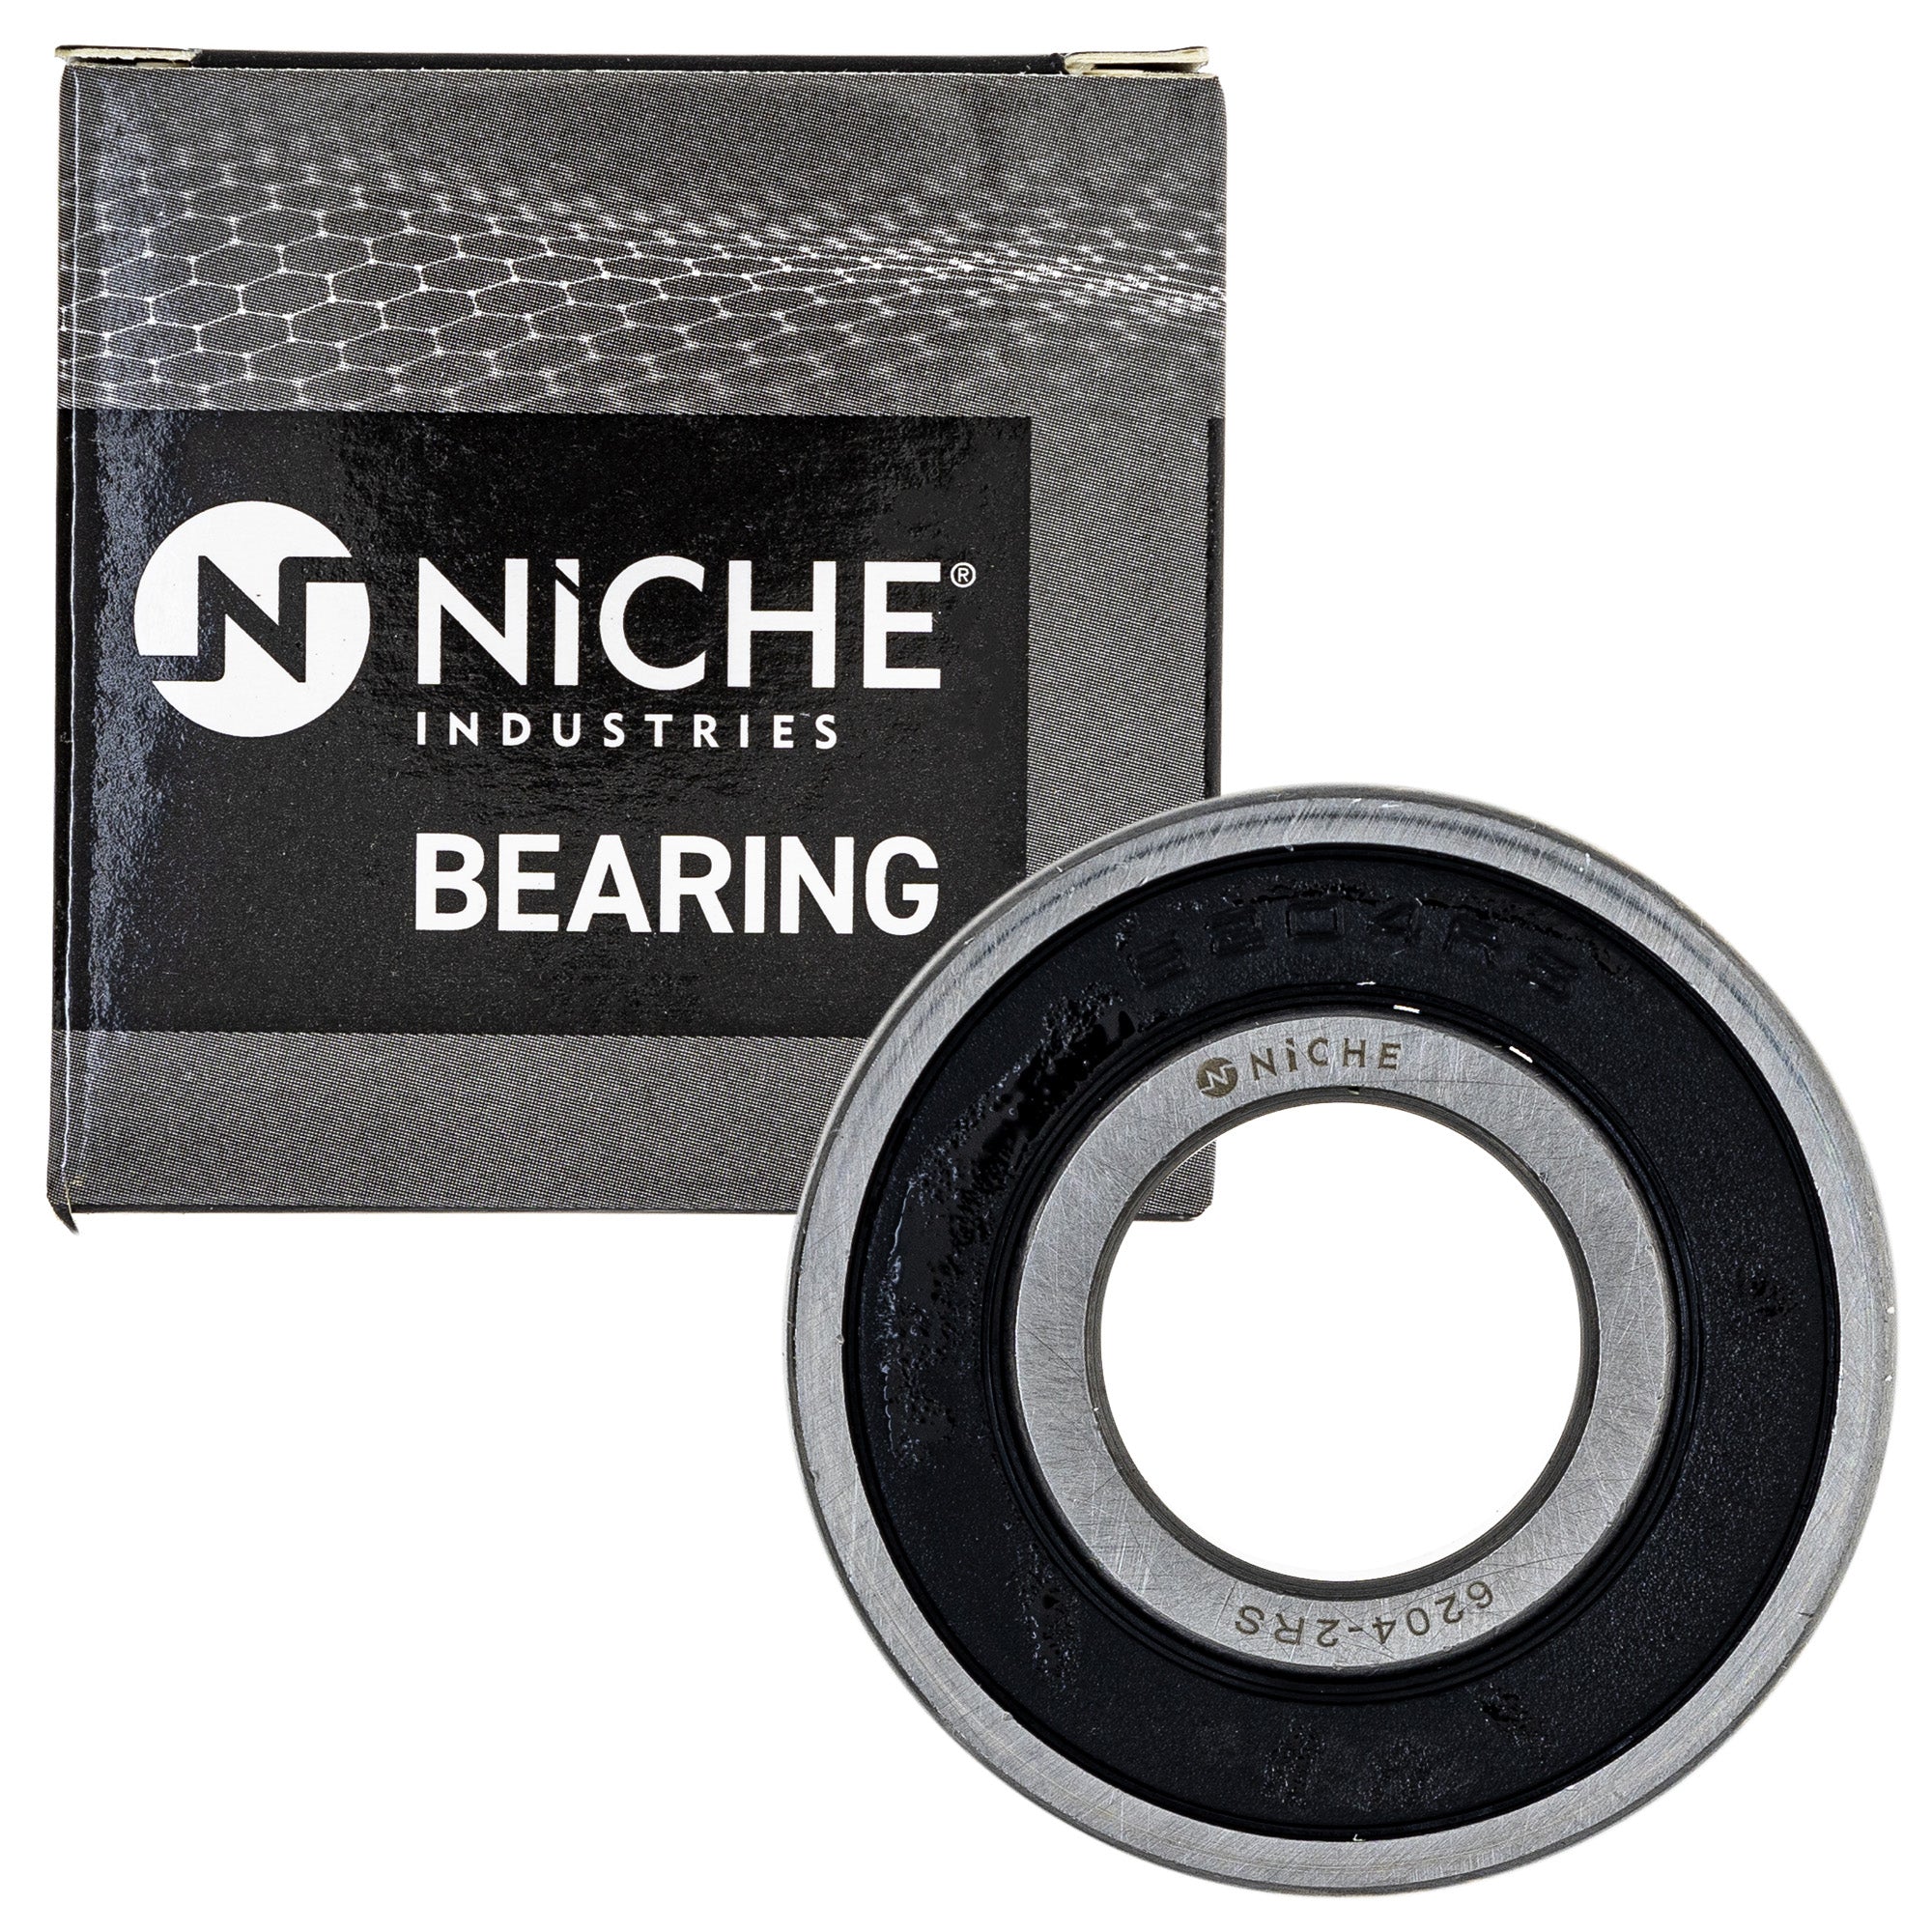 NICHE MK1009206 Wheel Bearing Seal Kit for zOTHER Ref No G310R